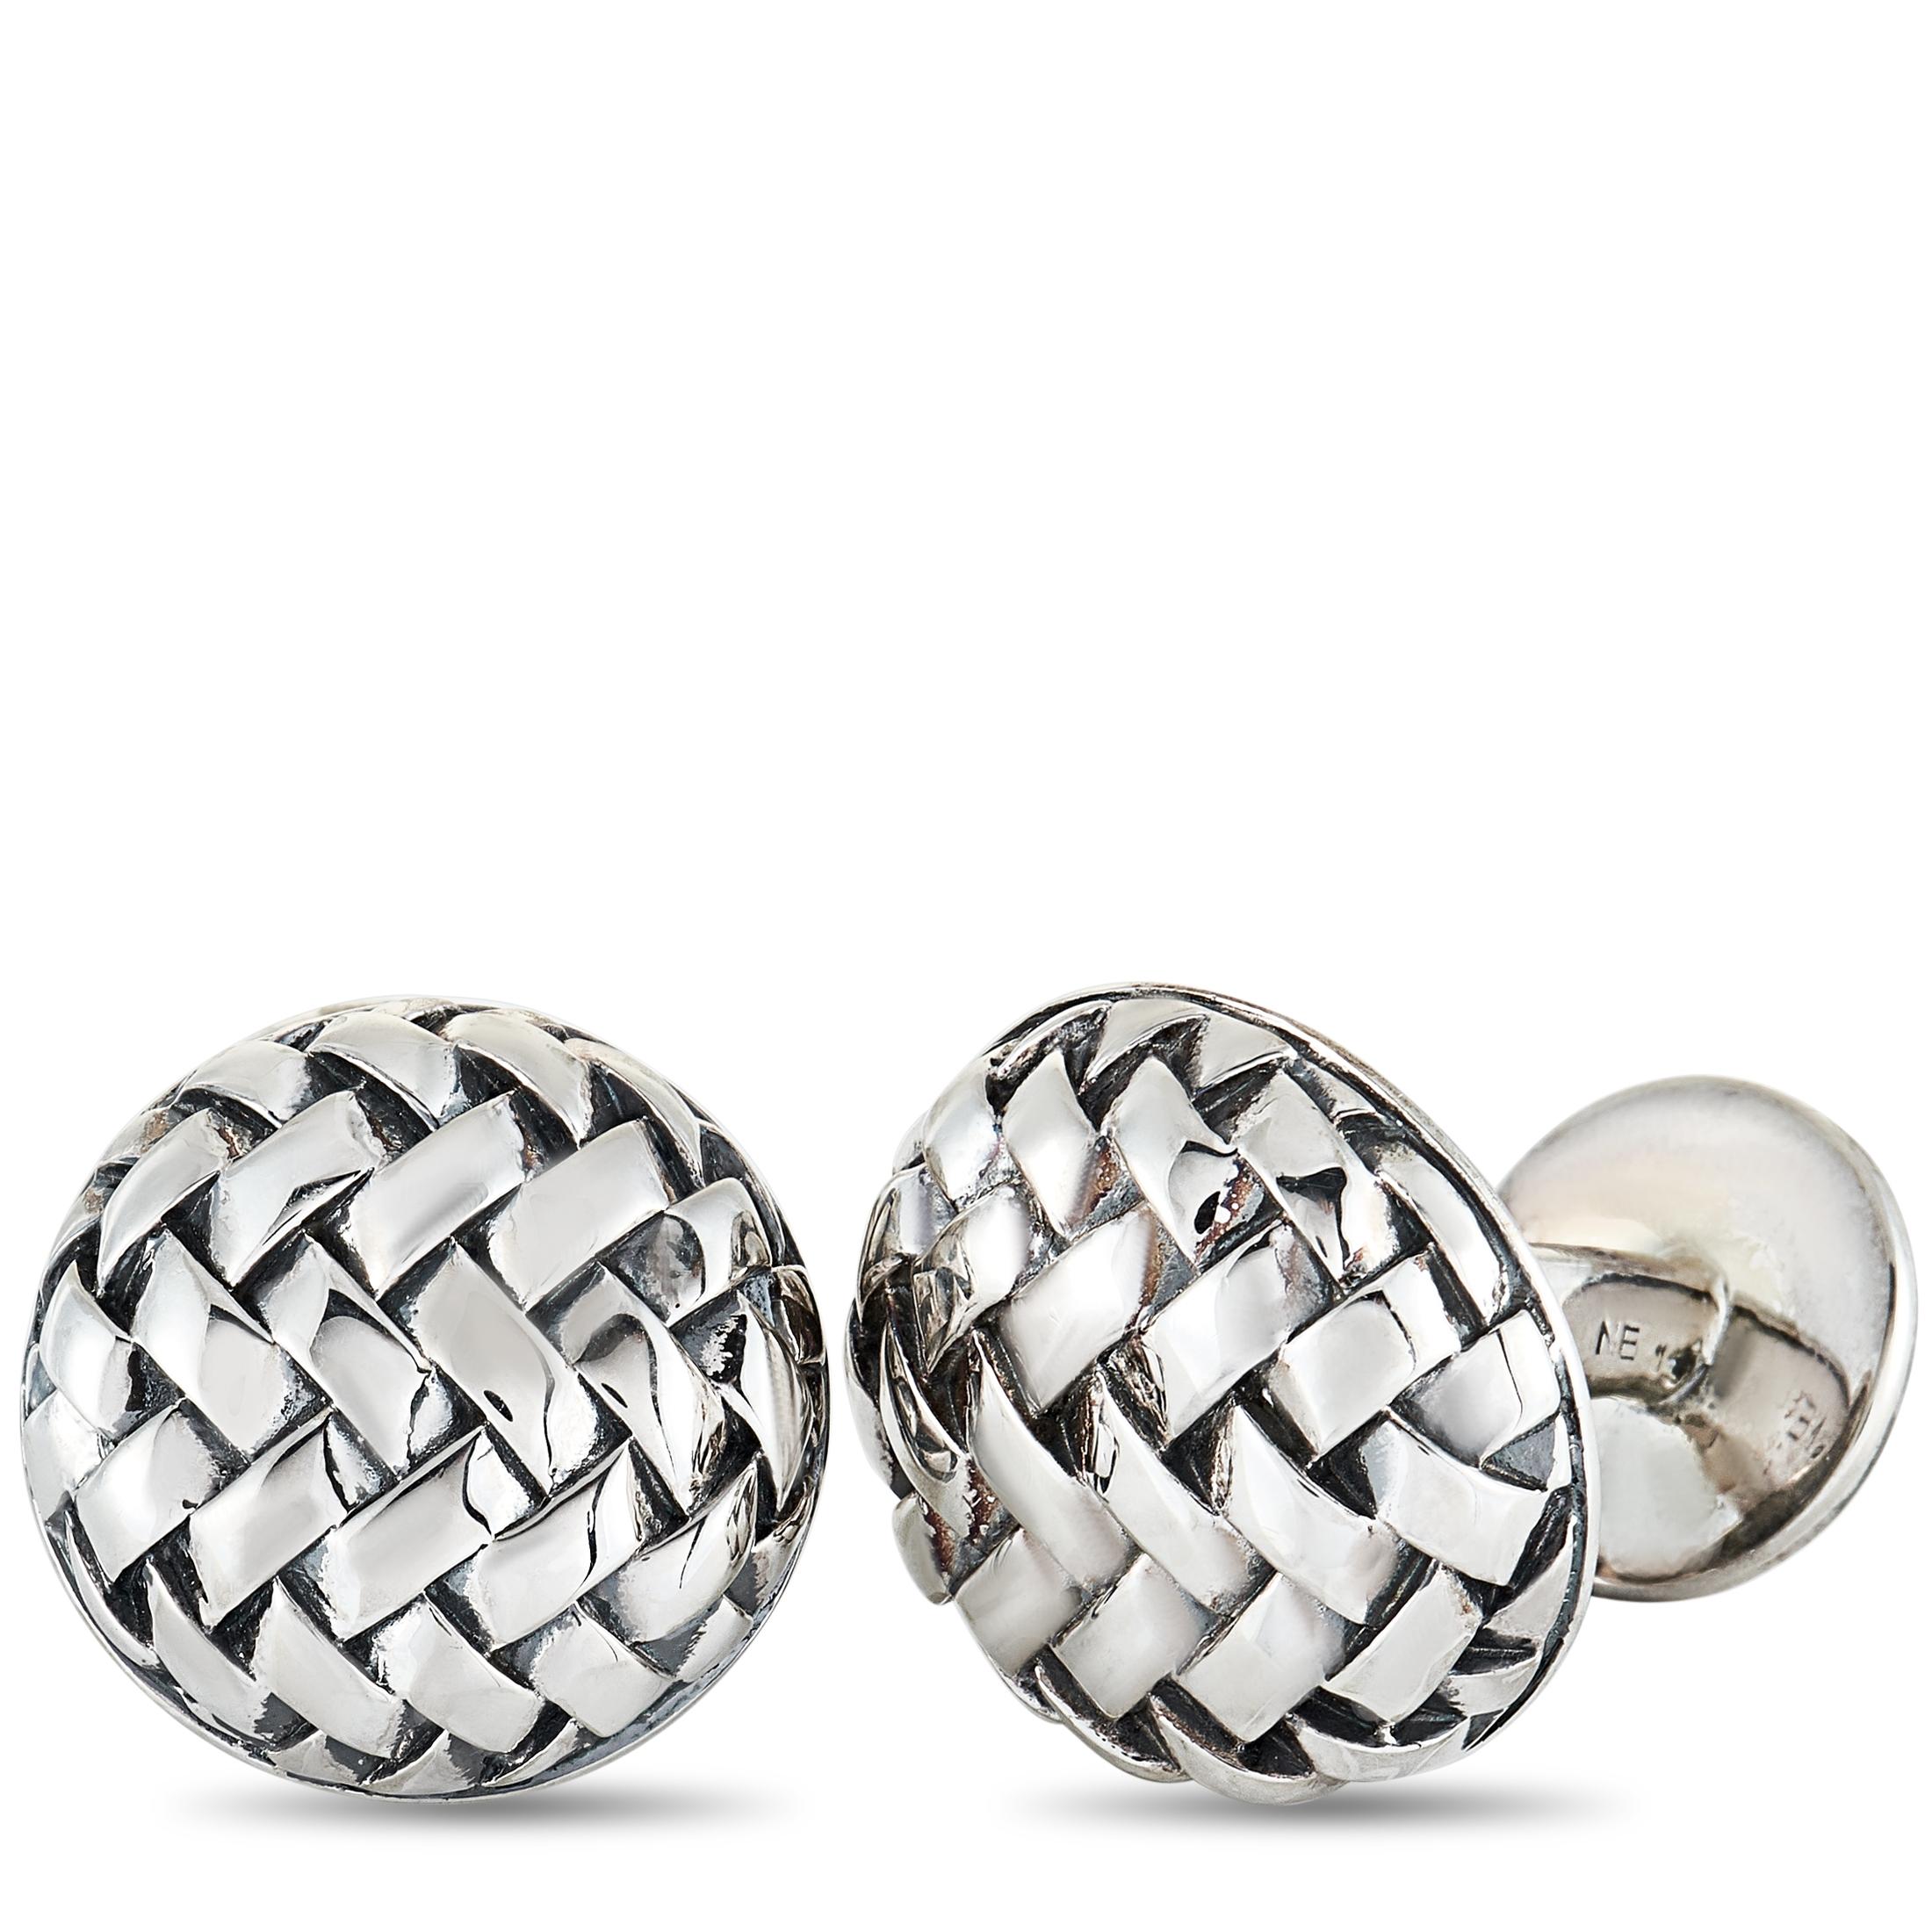 These Scott Kay cufflinks and tuxedo buttons set are crafted from sterling silver and weigh a total of 37.6 grams. The buttons measure 0.48” in length and 0.48” in width, and the cufflinks measure 0.75” in length and 0.75” in width.

Offered in